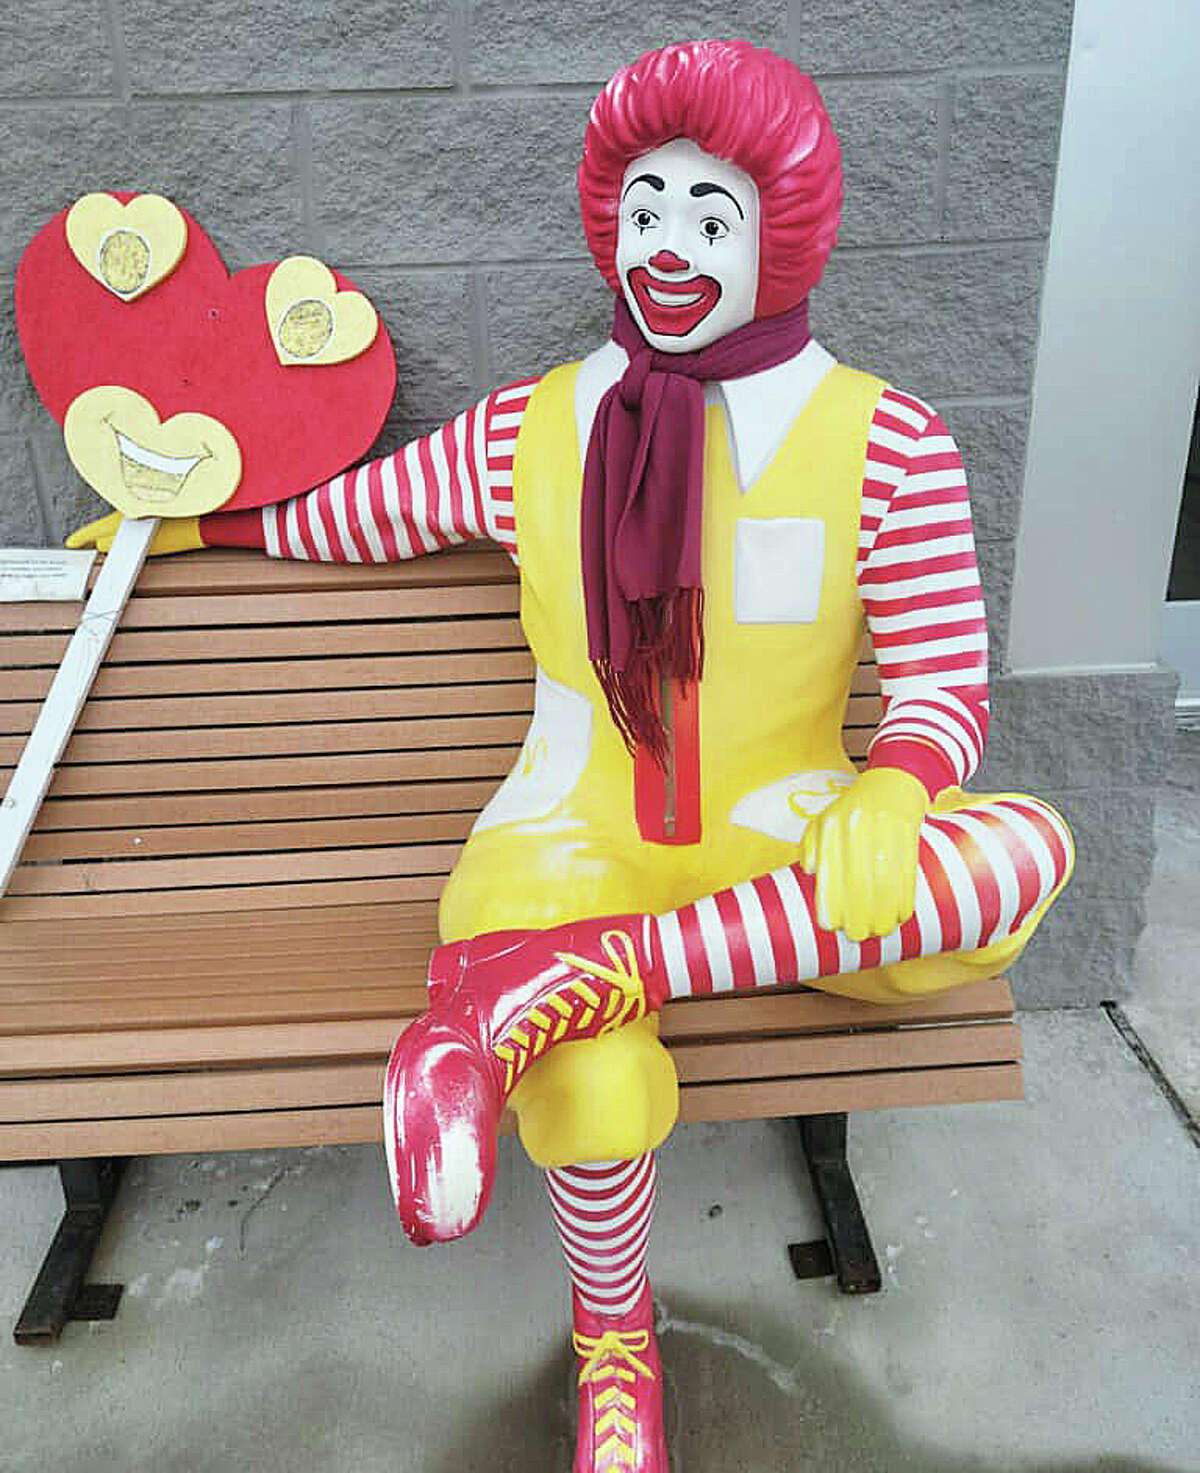 Bad Axe police have located the missing Ronald McDonald statue, like the one seen in this photo, taken from the Bad Axe McDonald's early Sunday.